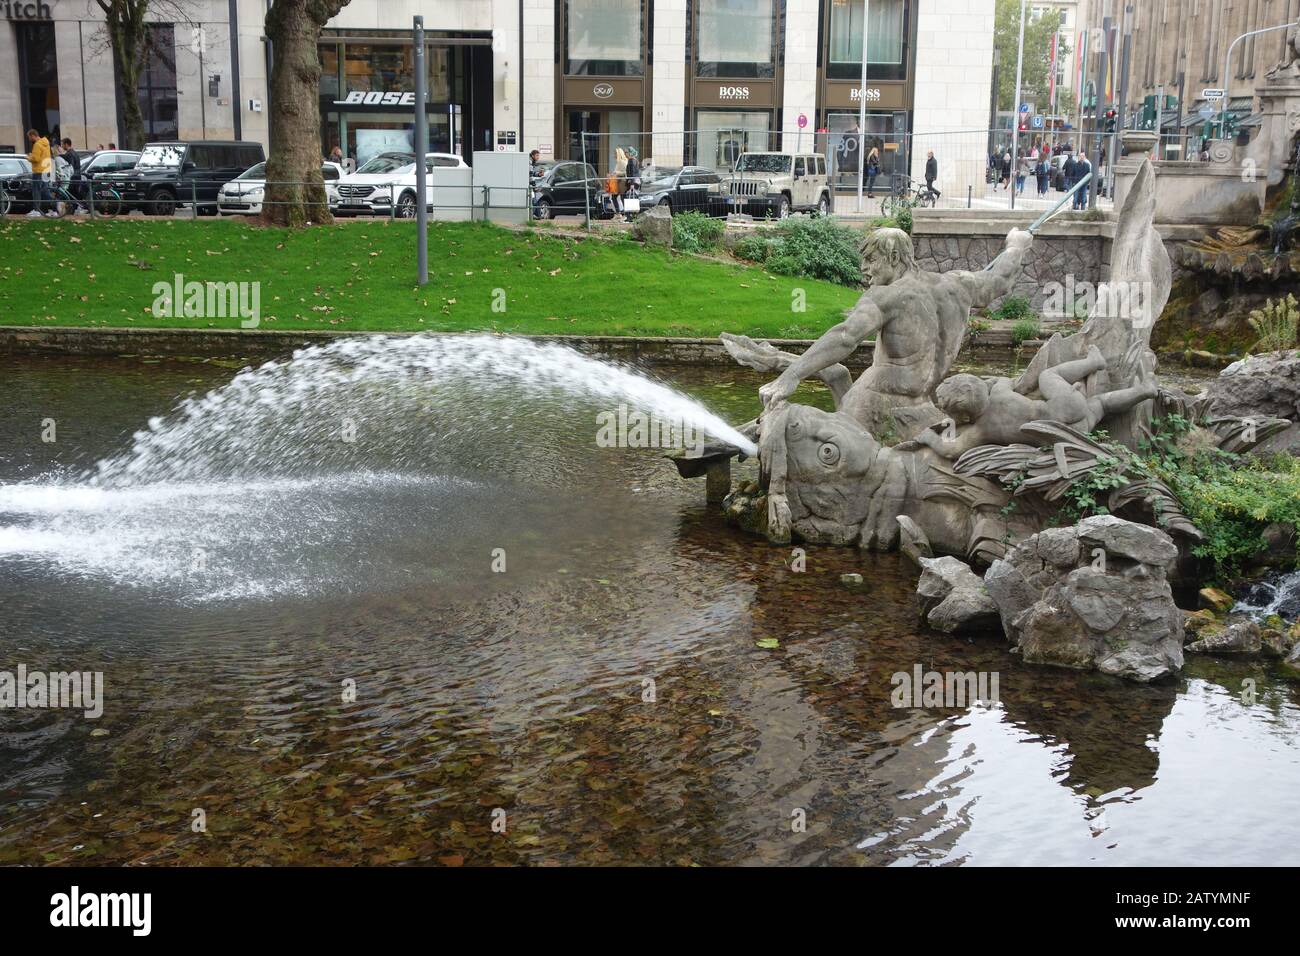 The Tritonenbrunnen or Triton Fountain, an ornately carved fountain on the Koenigsallee canal. Stock Photo